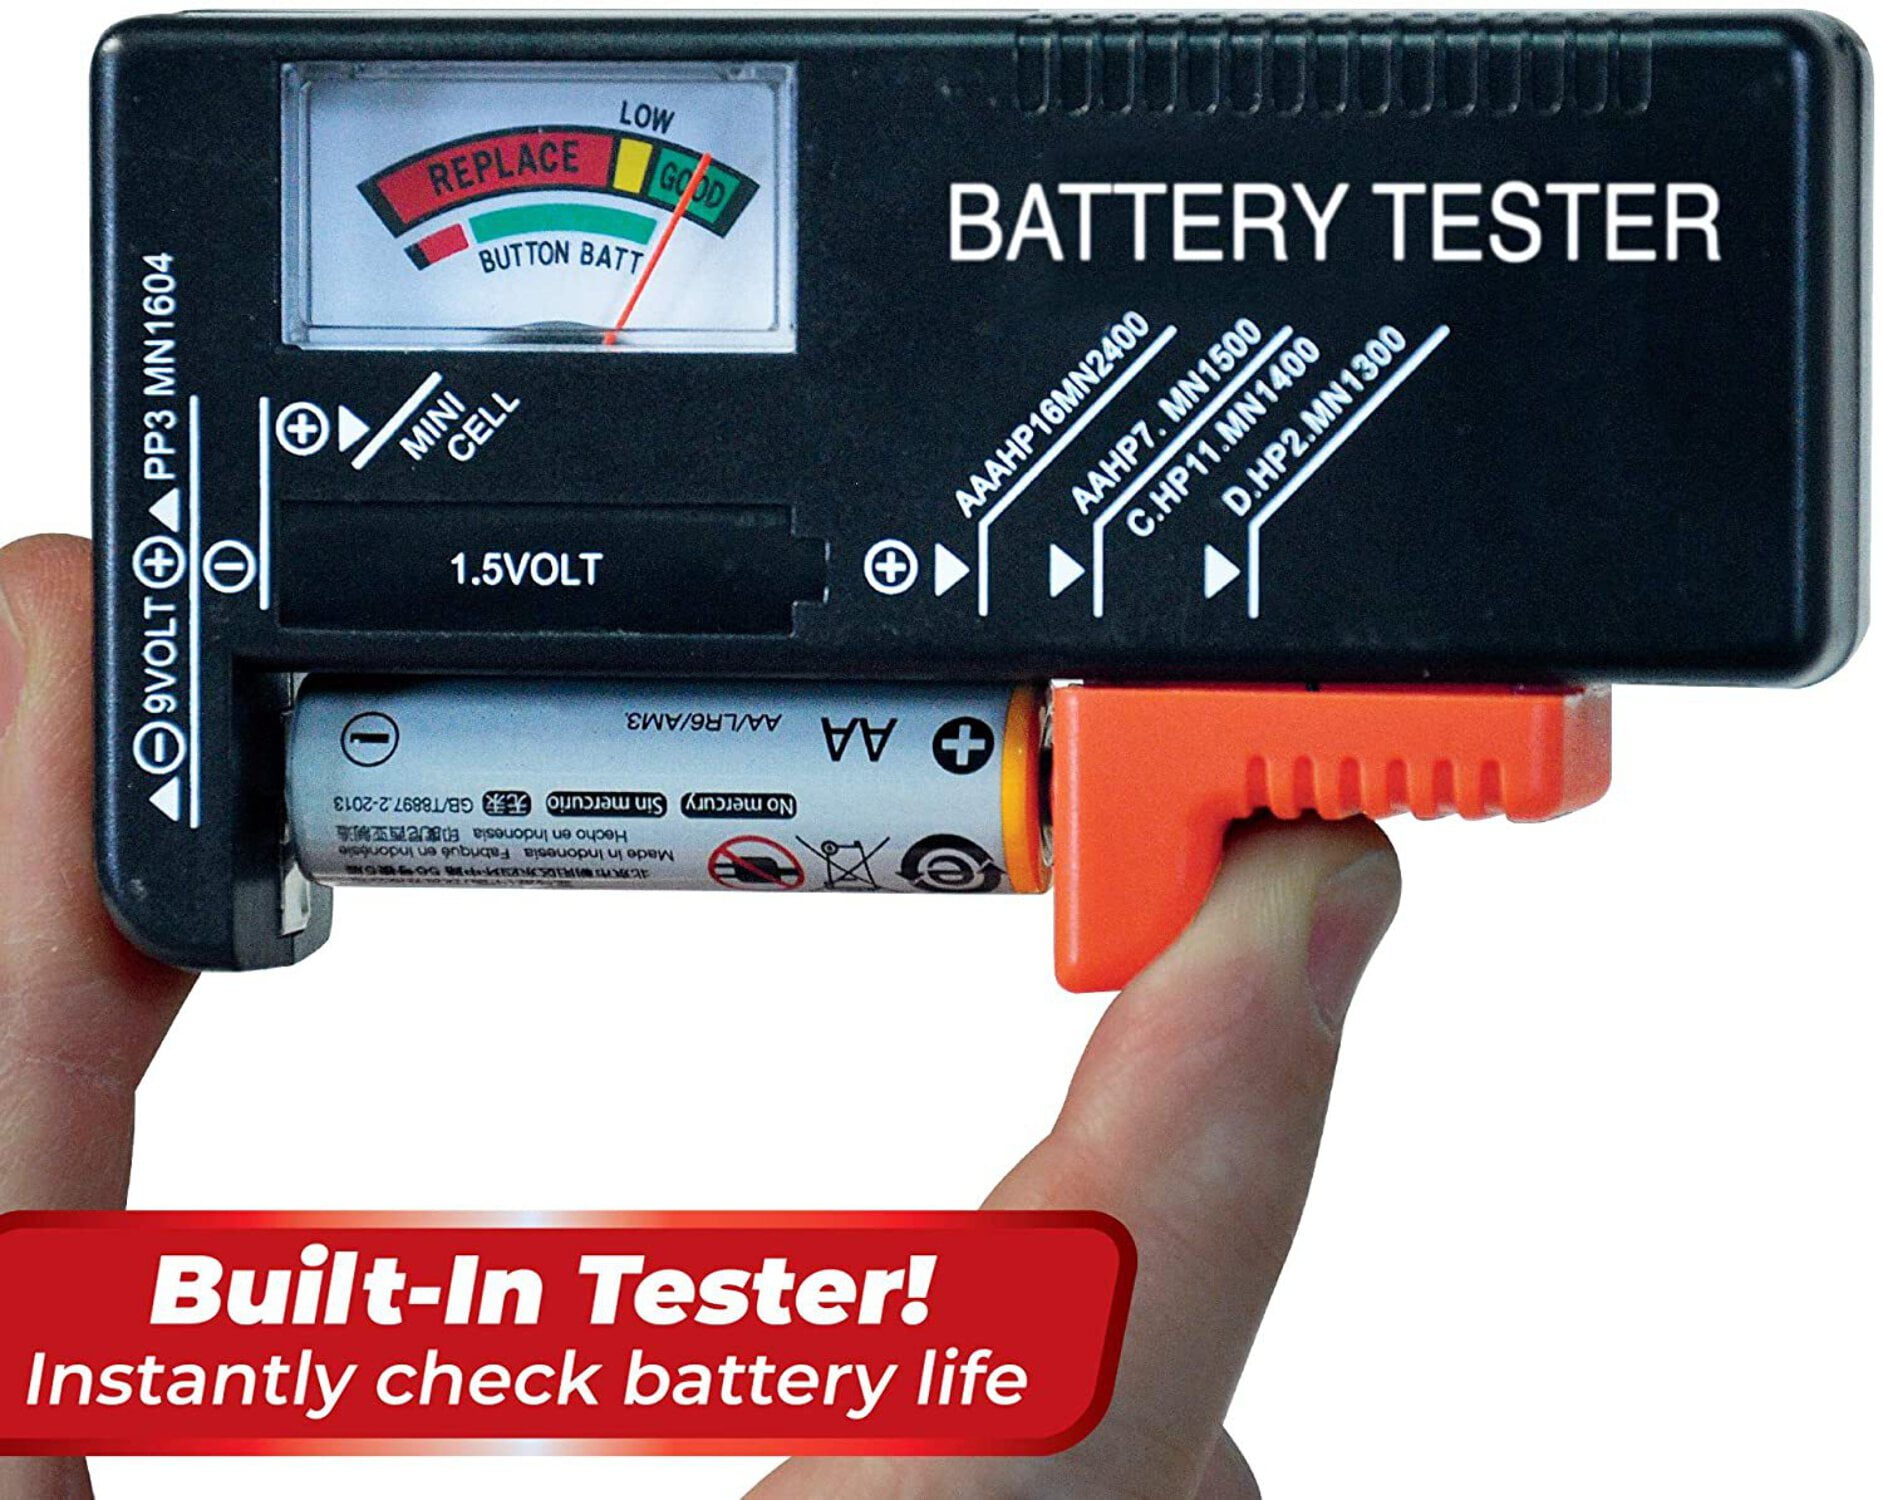 Battery Daddy Smart AS SEEN ON TV, BATTERY TESTER, BATTERY STORAGE  BOX,GENUINE